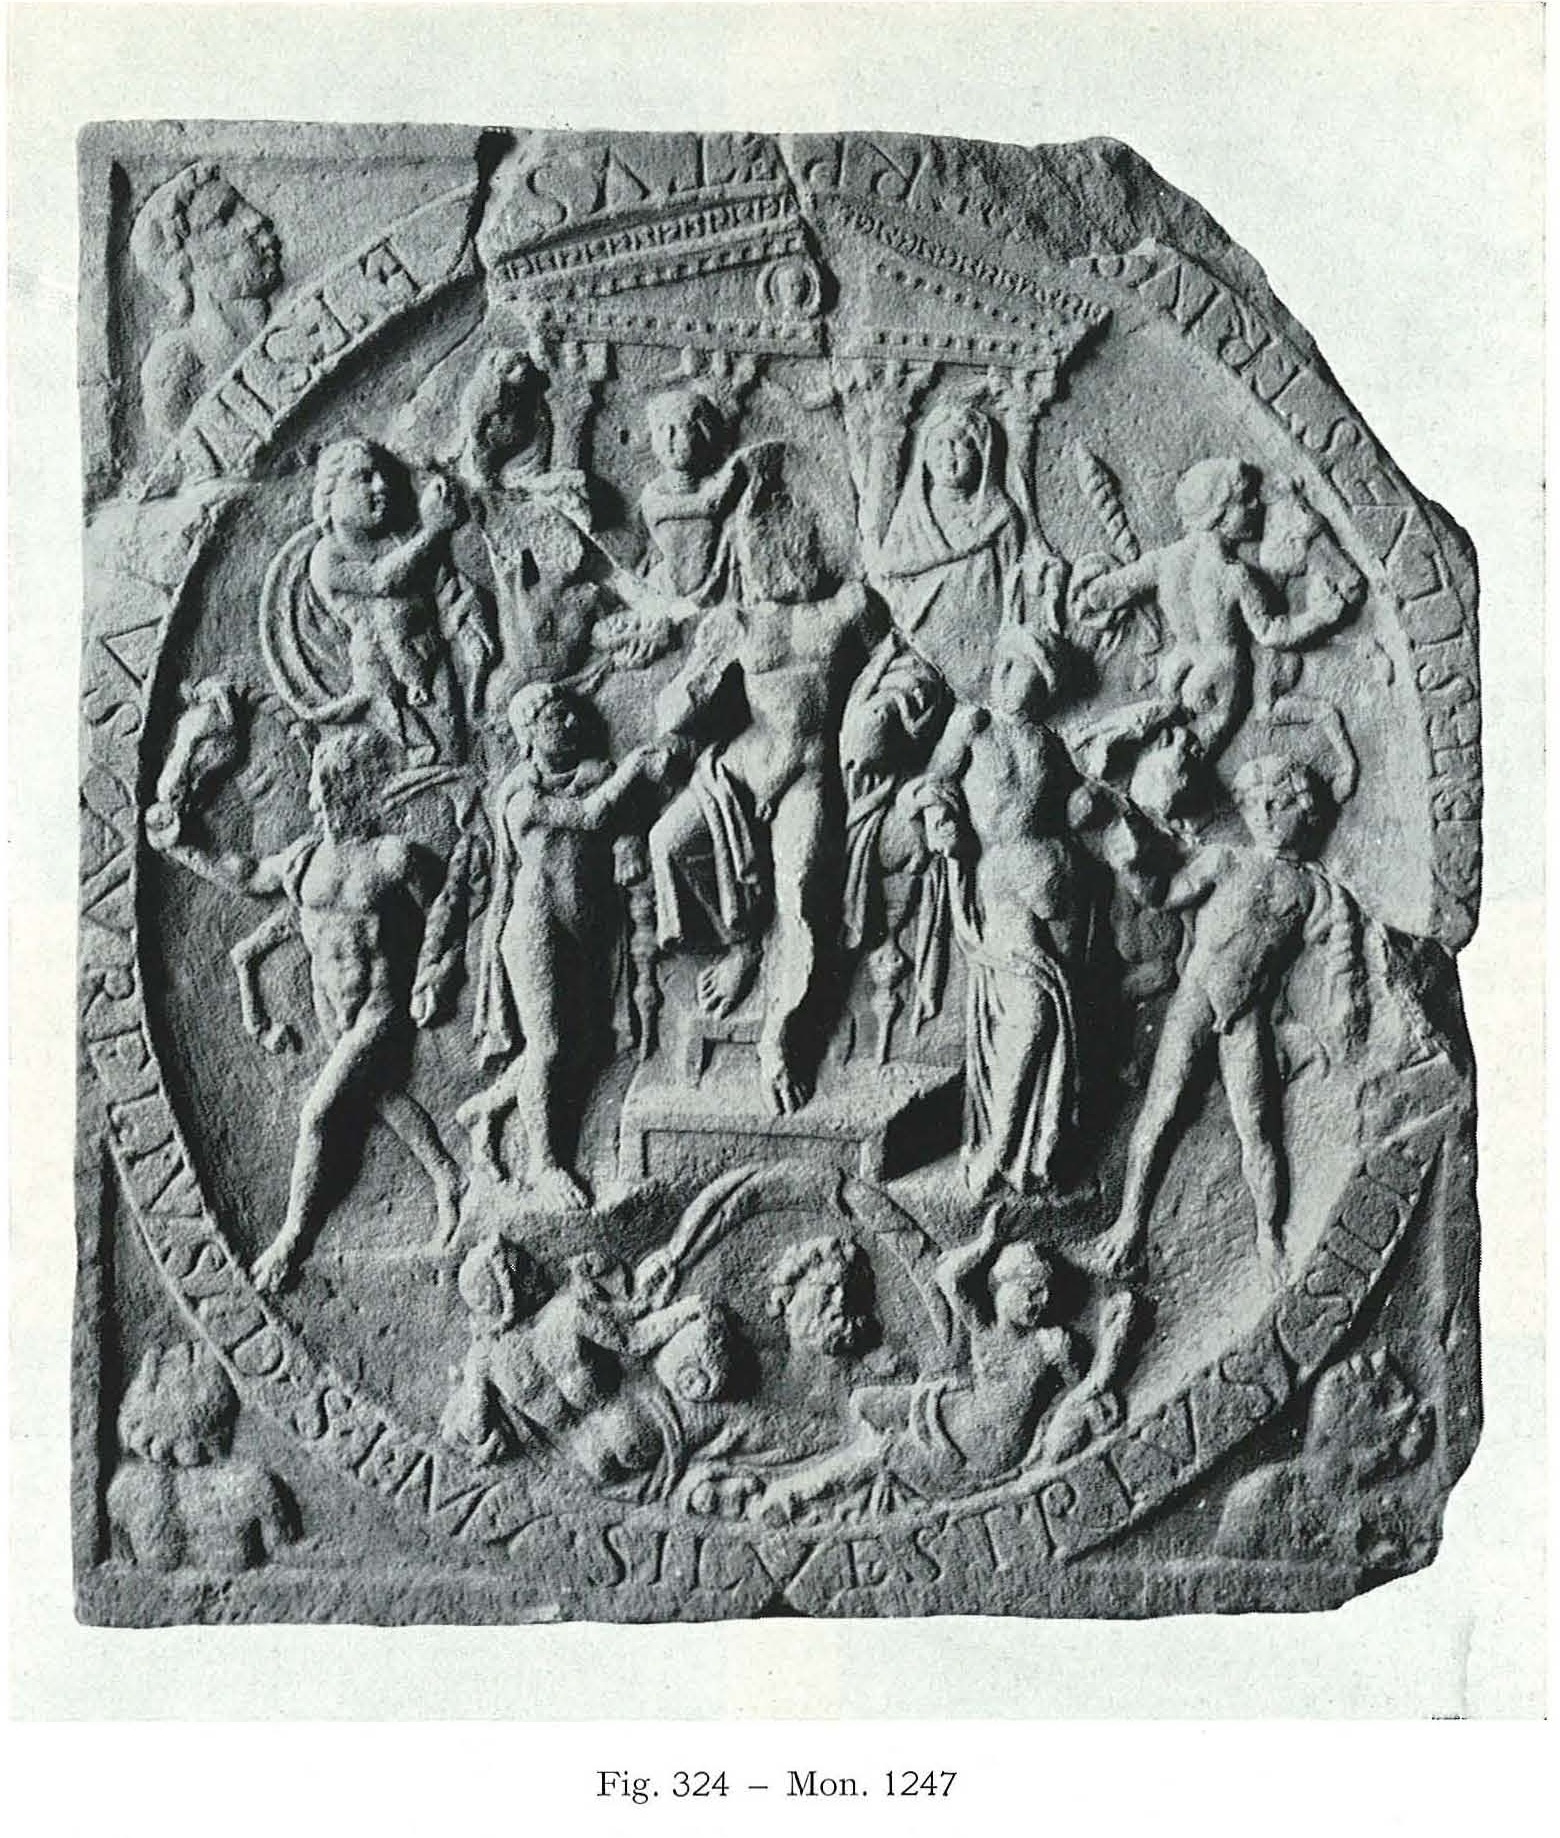 Back side of the relief of Dieburg